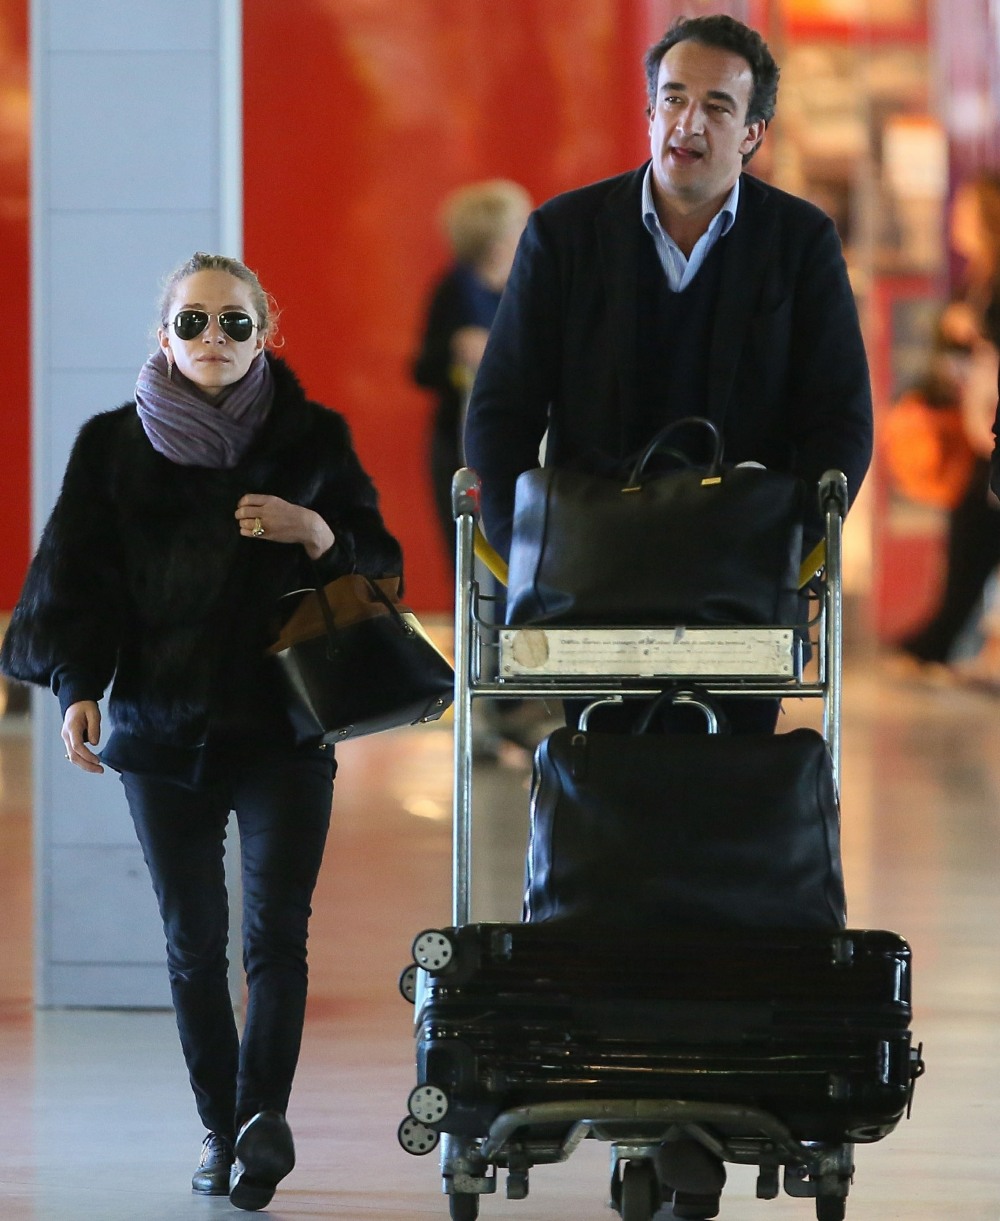 Mary-Kate Olsen Leaving Paris With Her Husband Olivier Sarkozy